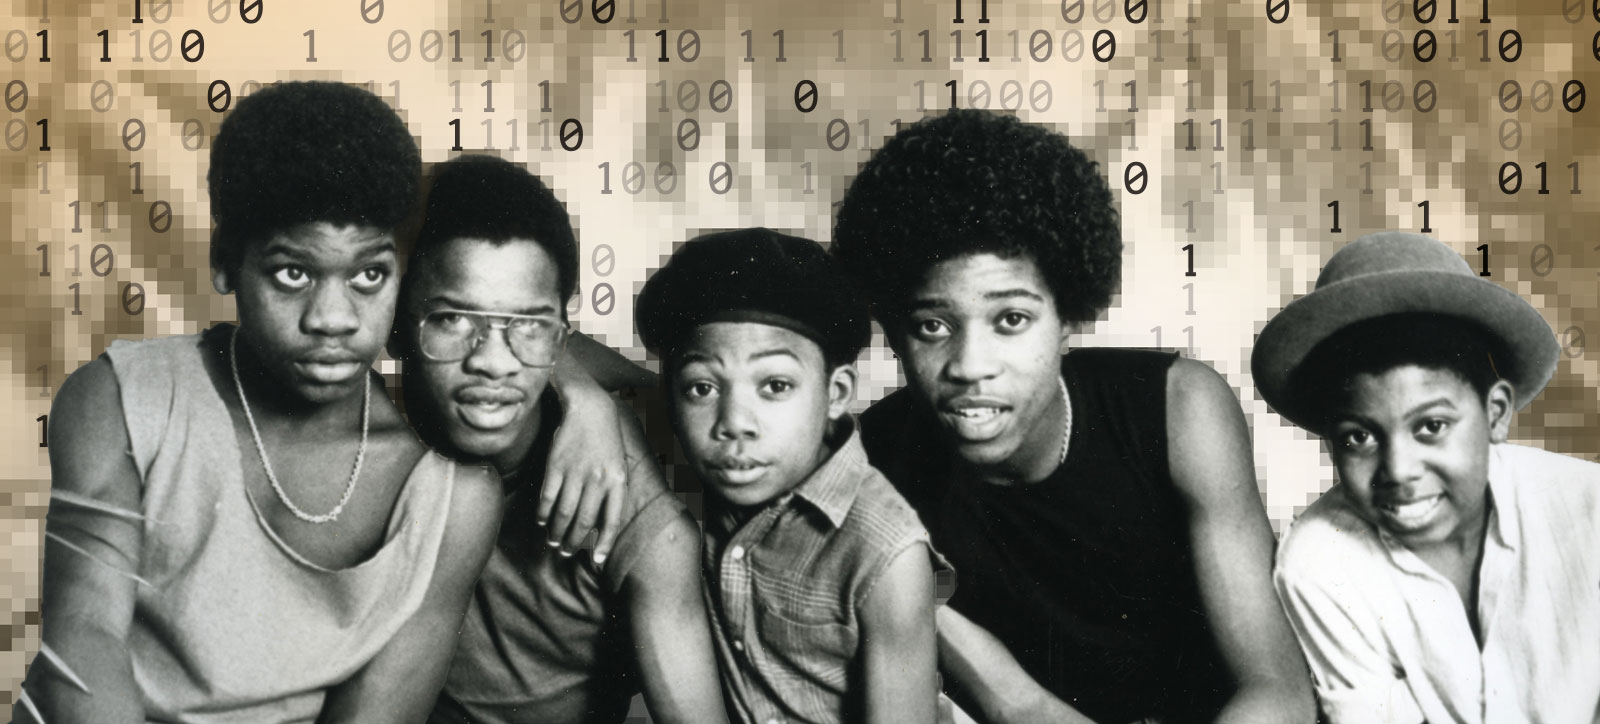 A photograph of Musical Youth, who topped the charts with the global hit Pass the Dutchie. The image has been edited to show coding patterns of 1s and 0s in the background to show how generative AI is reshaping intellectual property.